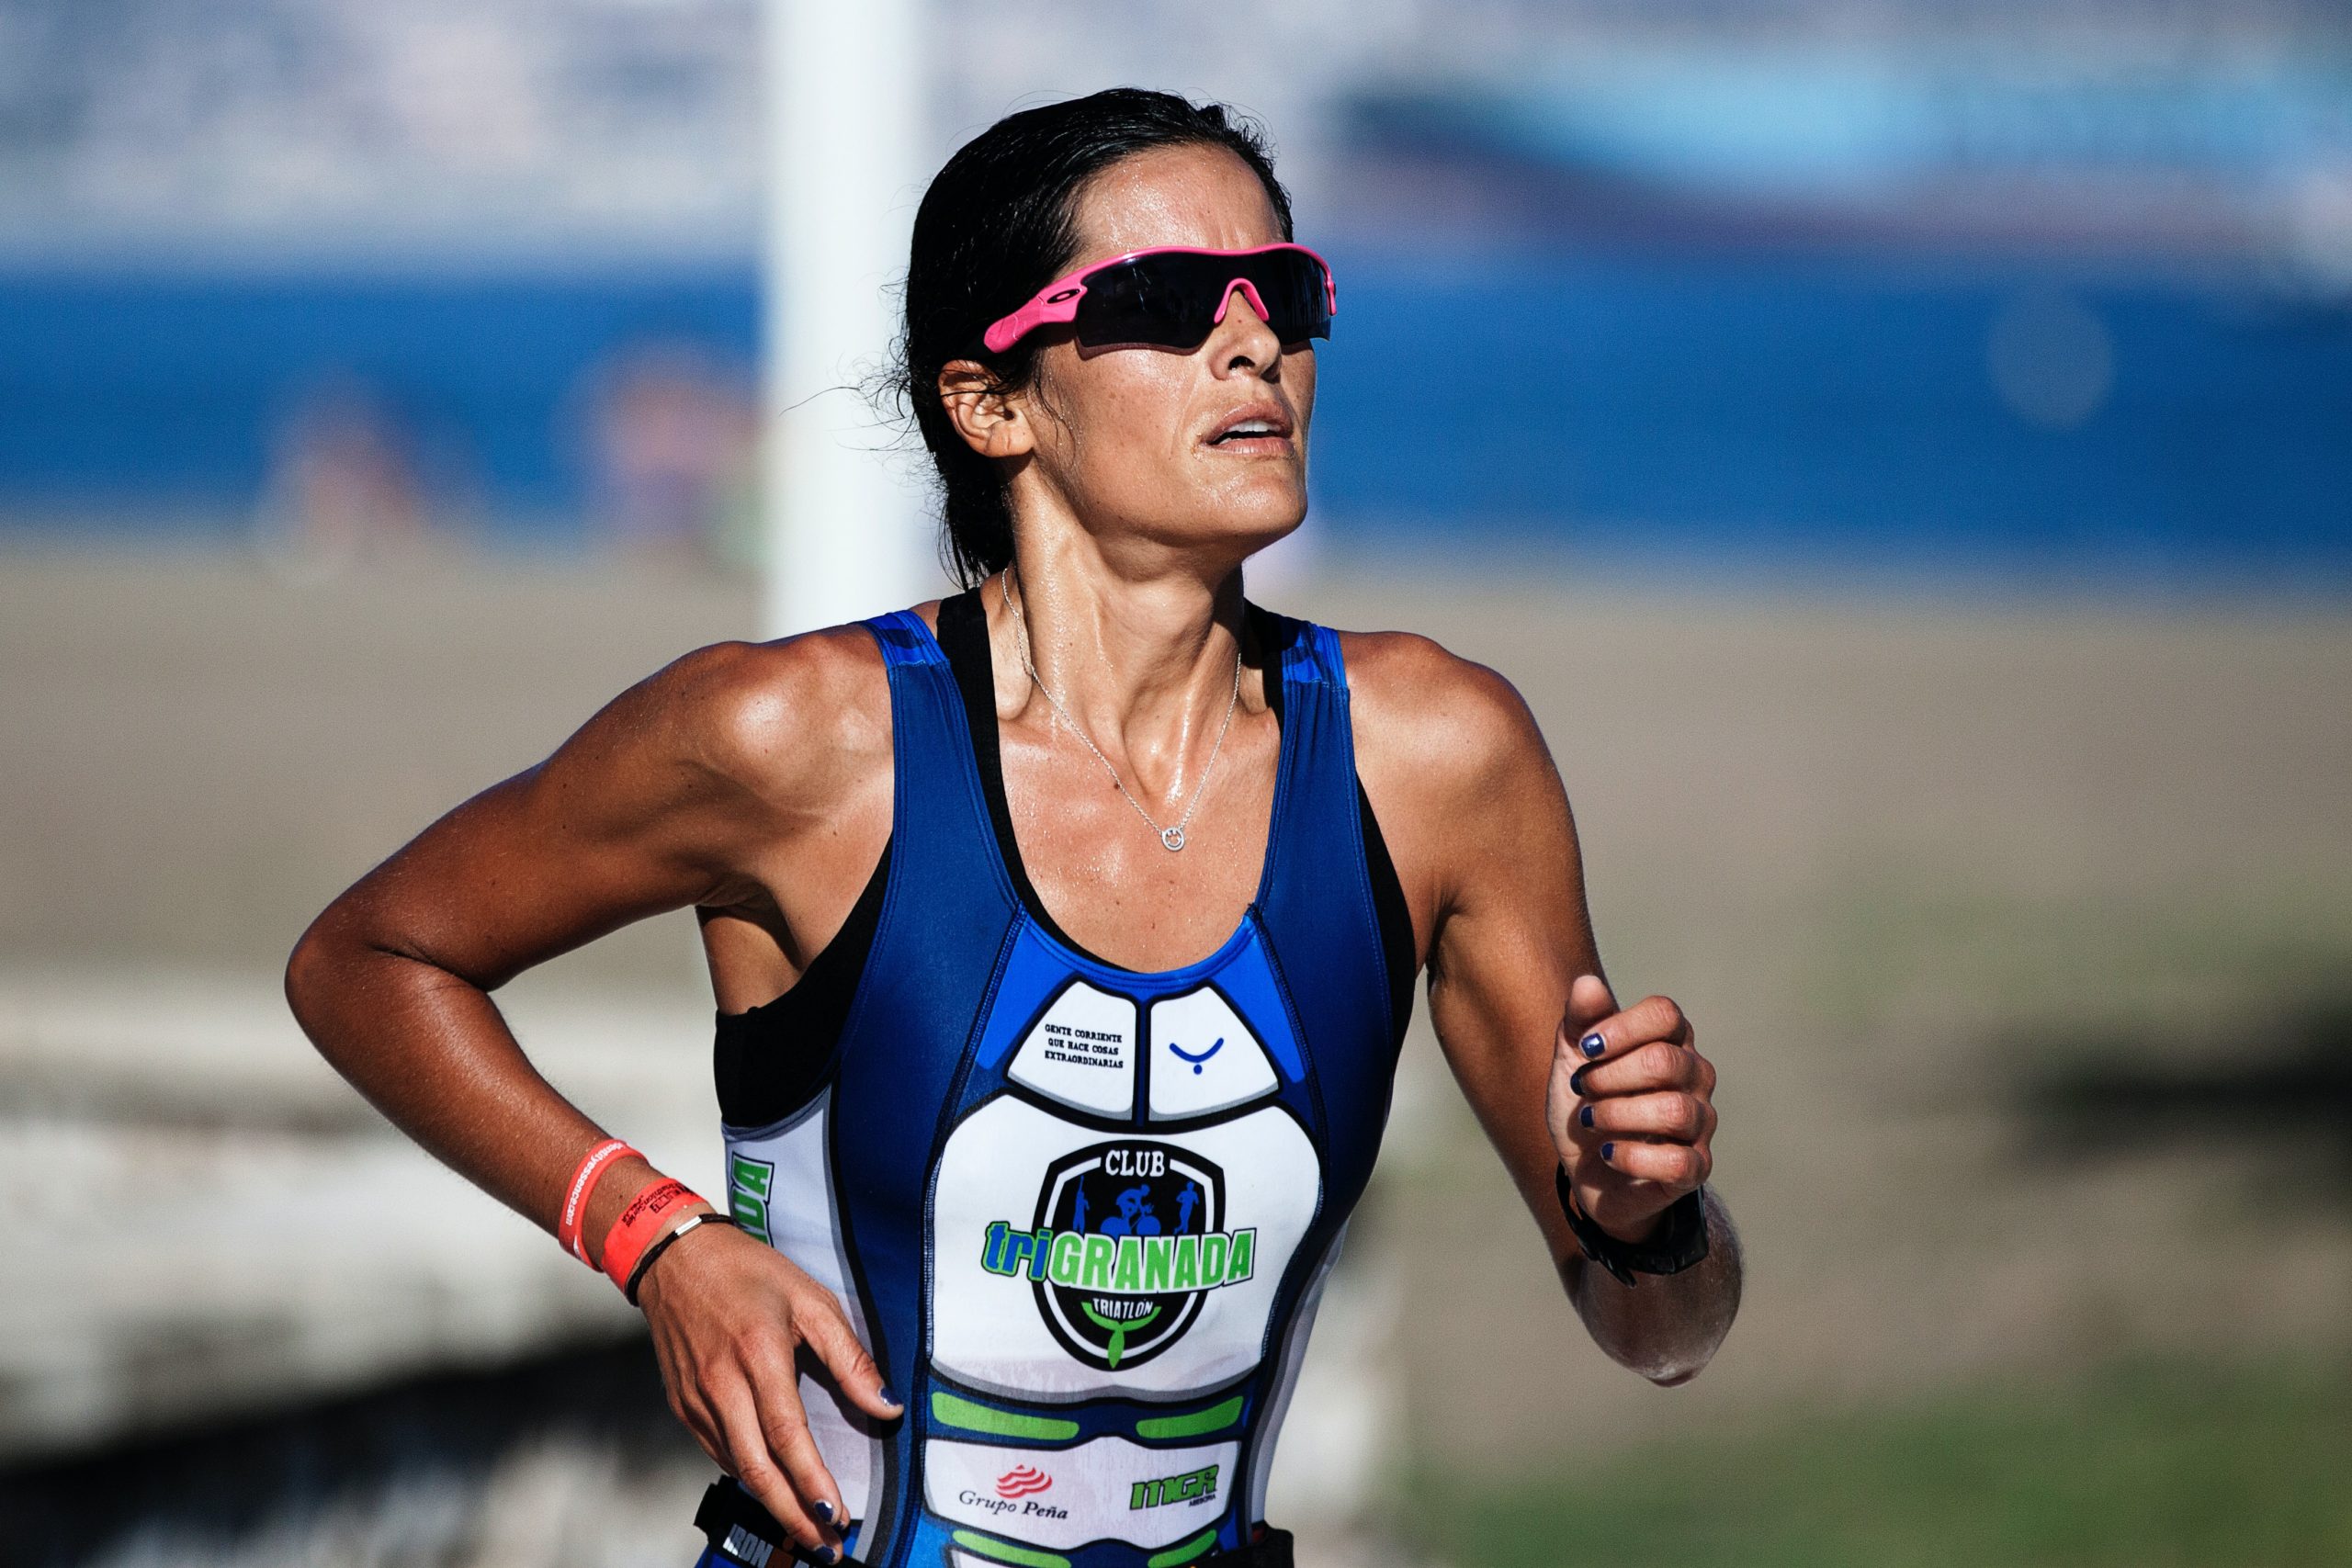 How triathletes can use coping mechanisms to perform better in training and on race day